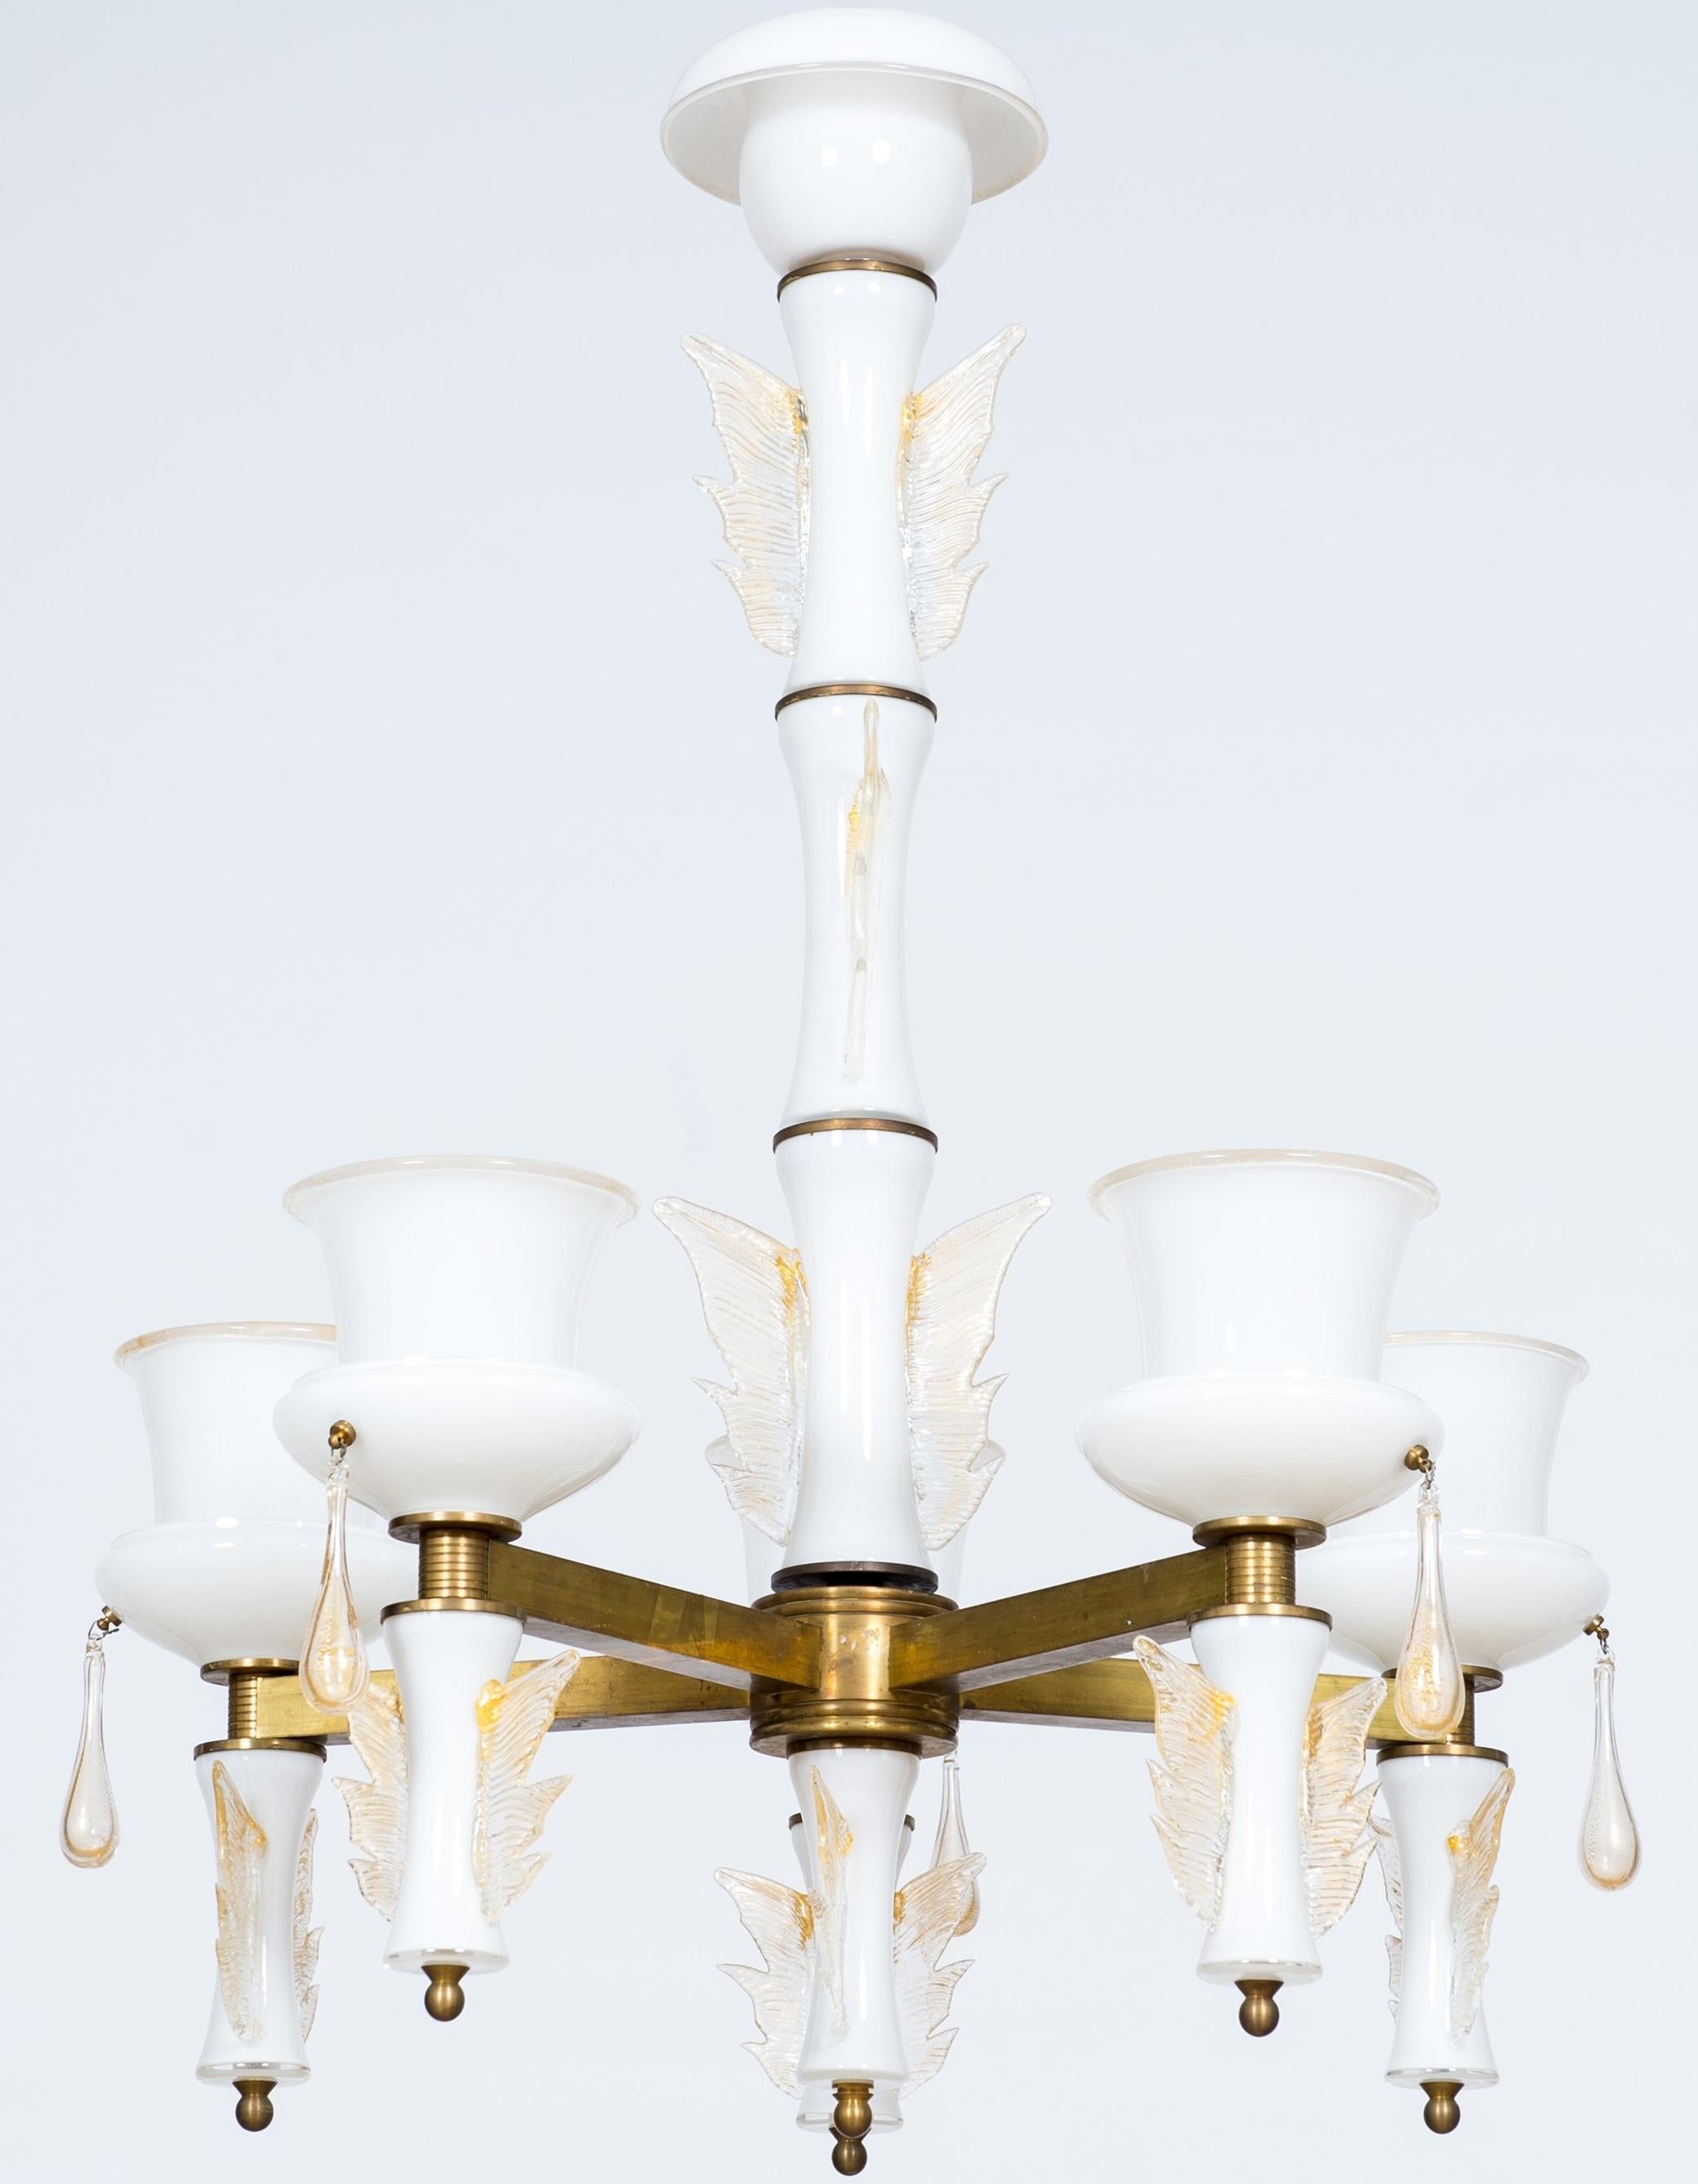 Elegant and unique, Italian Venetian, chandelier, blown Murano glass, white and brass, De Majo, 1970s.
This masterpiece is composed by an handcrafted brass framework having the shape of a star, where five beautiful white Murano glass bowls with